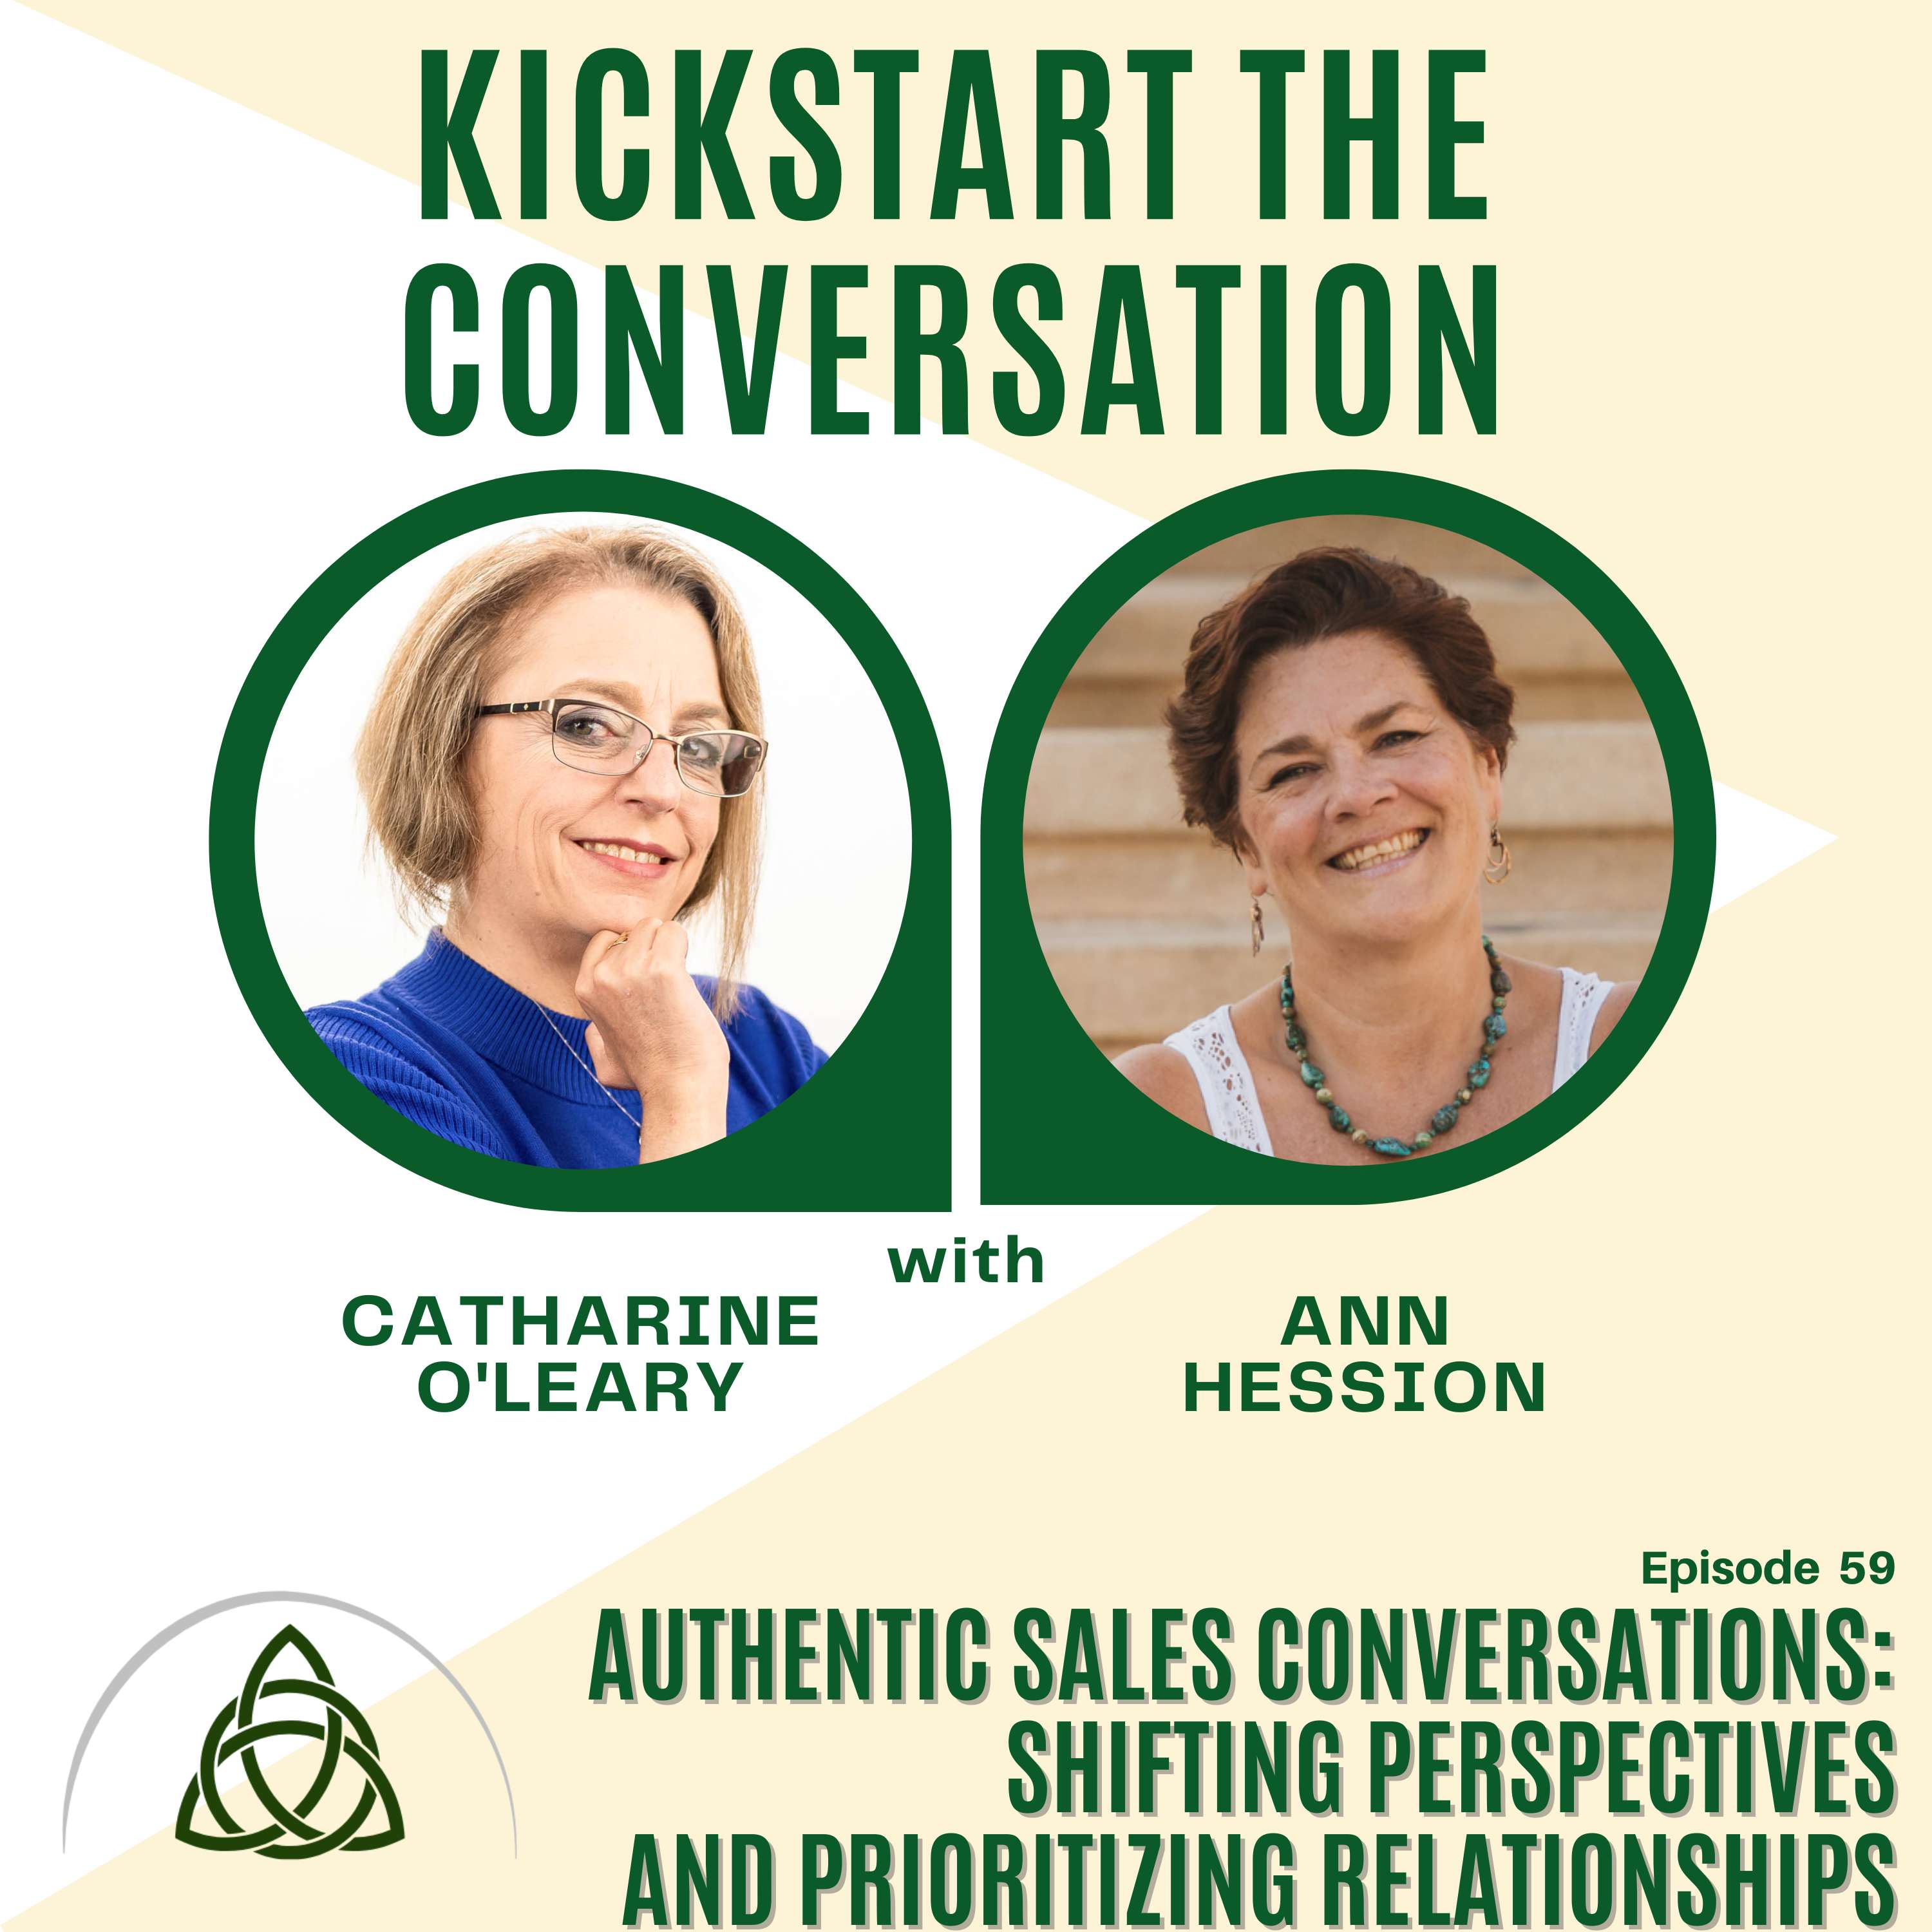 Authentic Sales Conversations with Ann Hession: Shifting Perspectives and Prioritizing Relationships